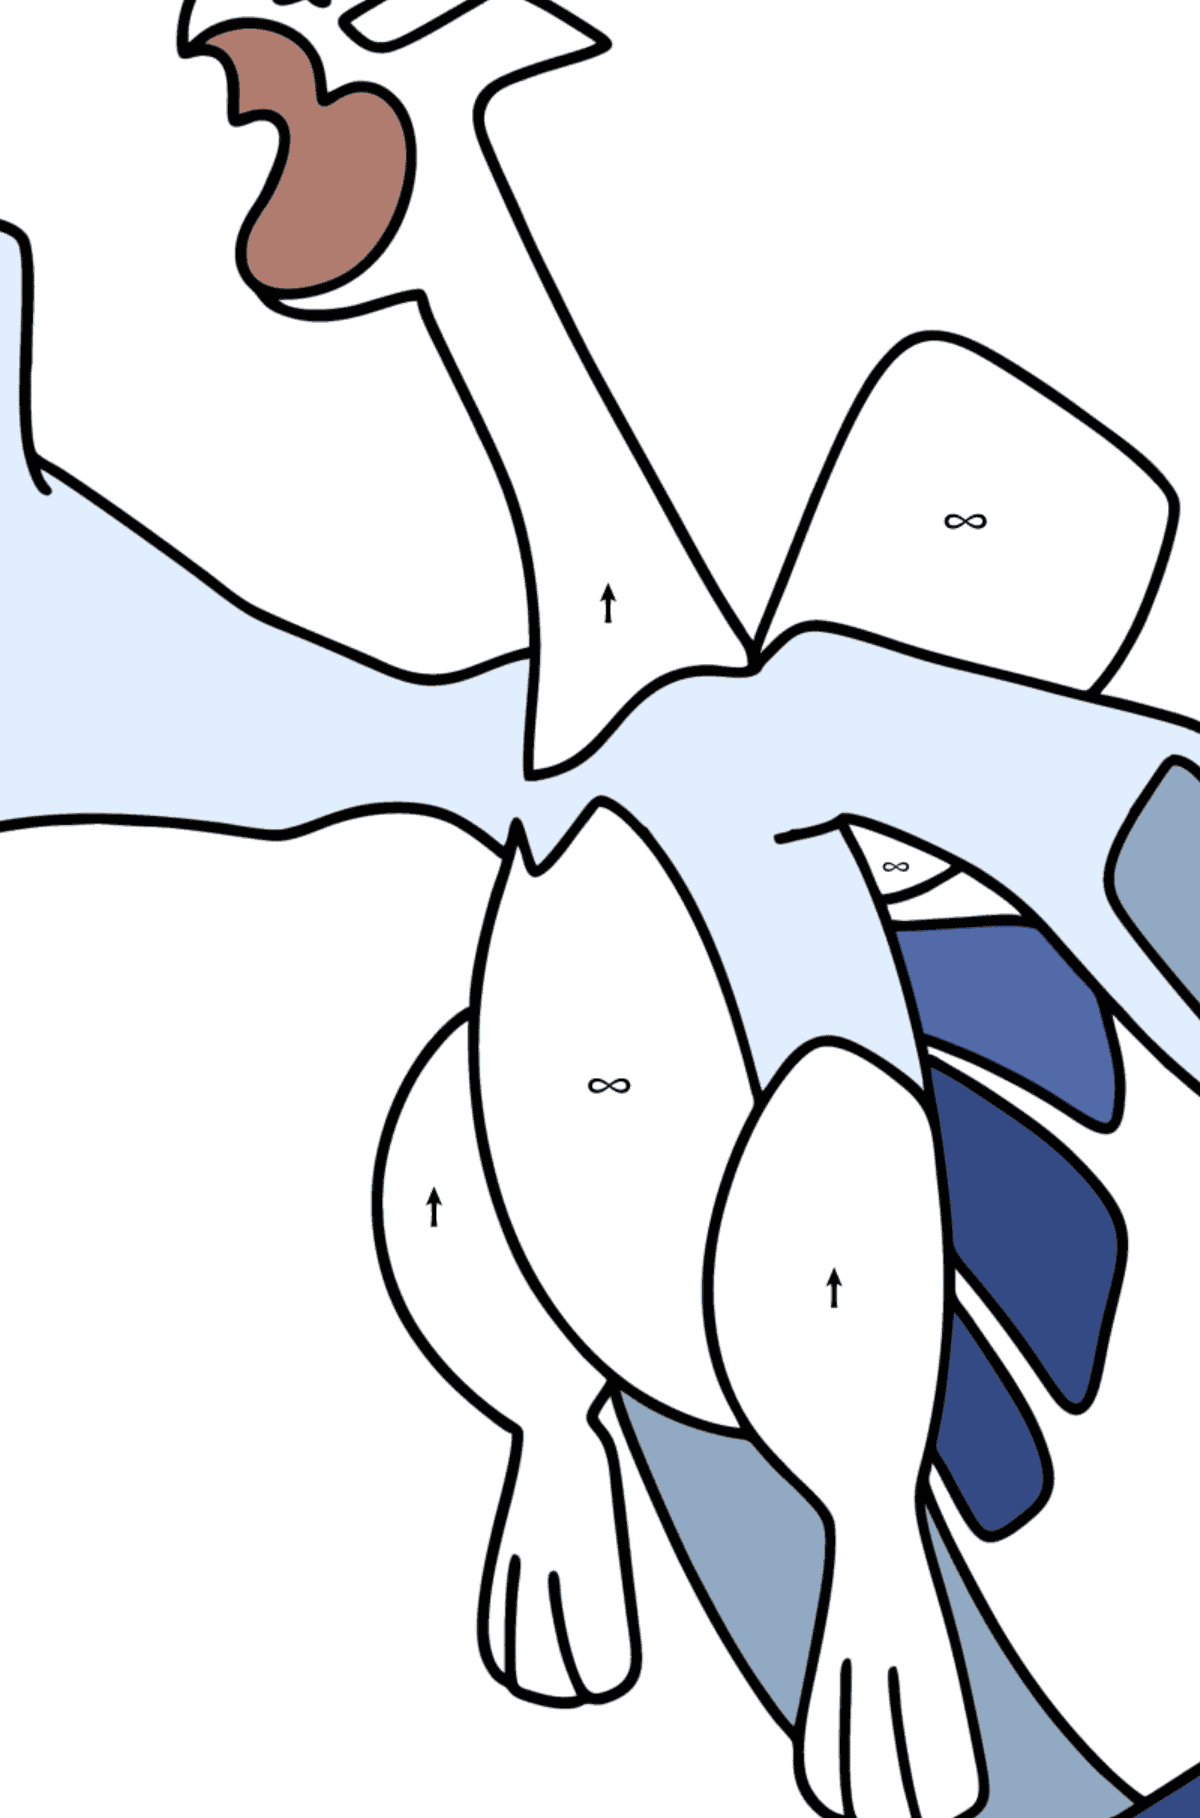 Coloring page Pokemon Go Lugia - Coloring by Symbols for Kids